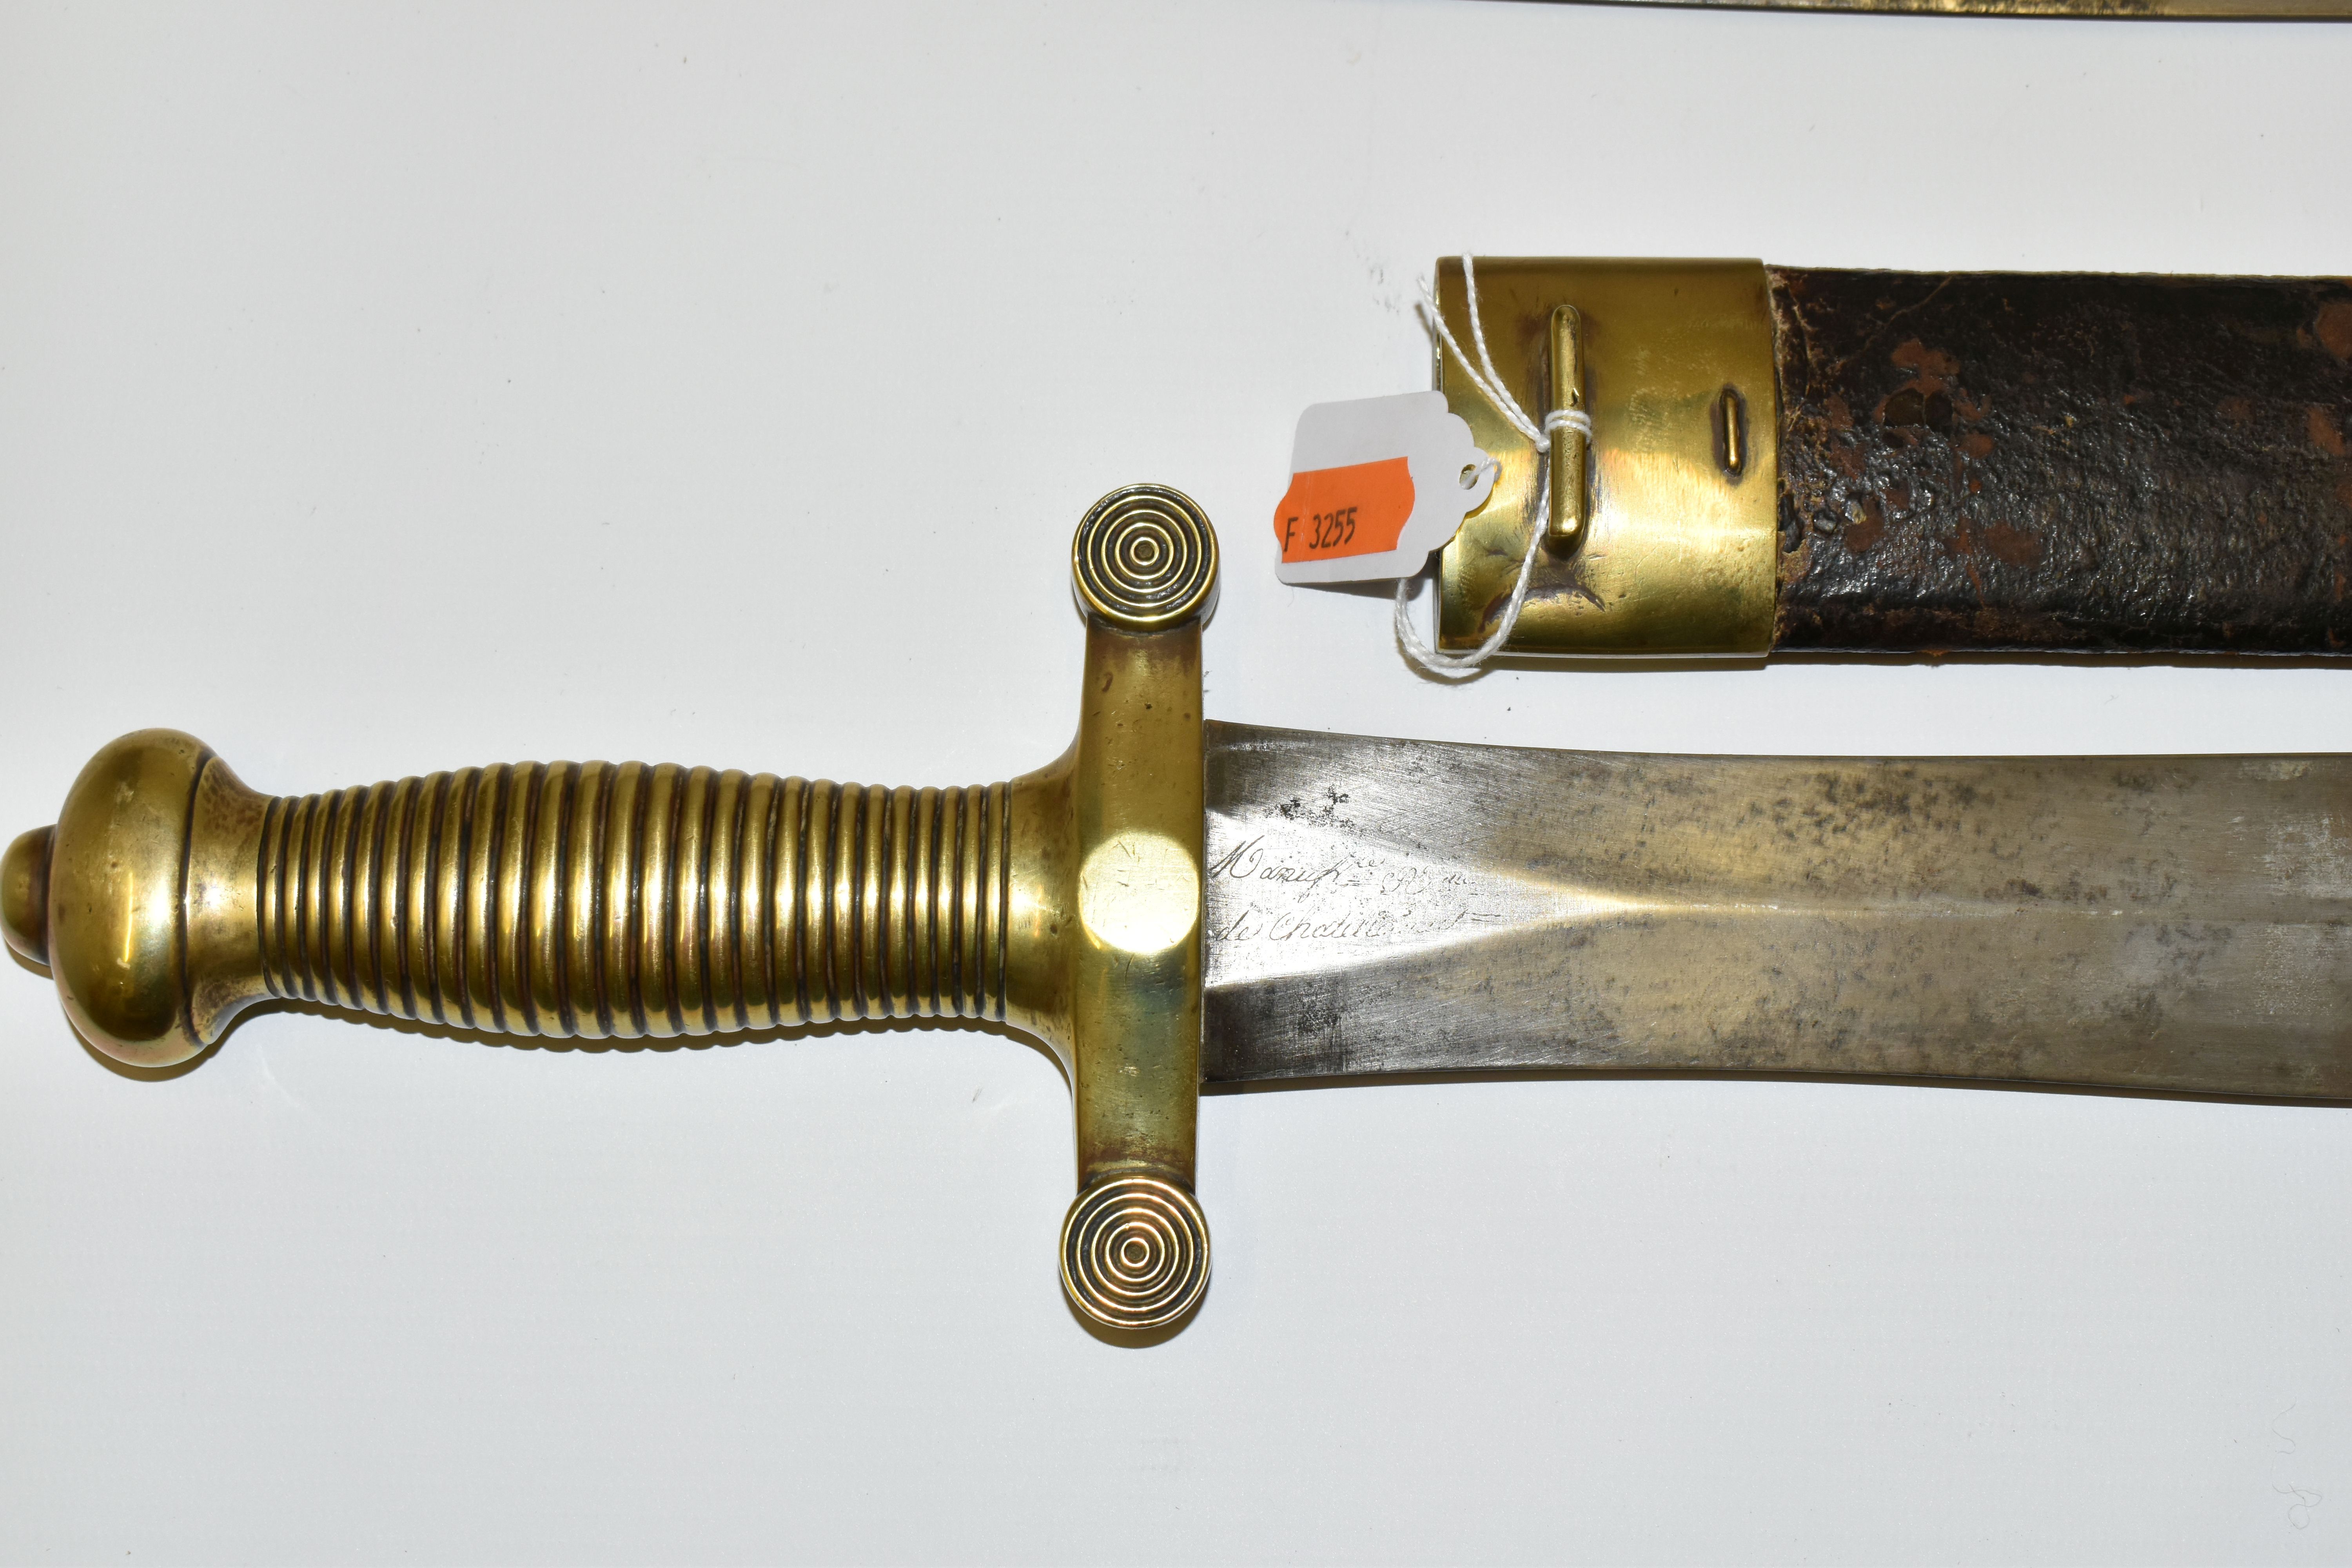 TWO MID 19TH CENTURY FRENCH ARMY CADETS GLADIUS SWORDS, in their original leather covered - Image 4 of 11